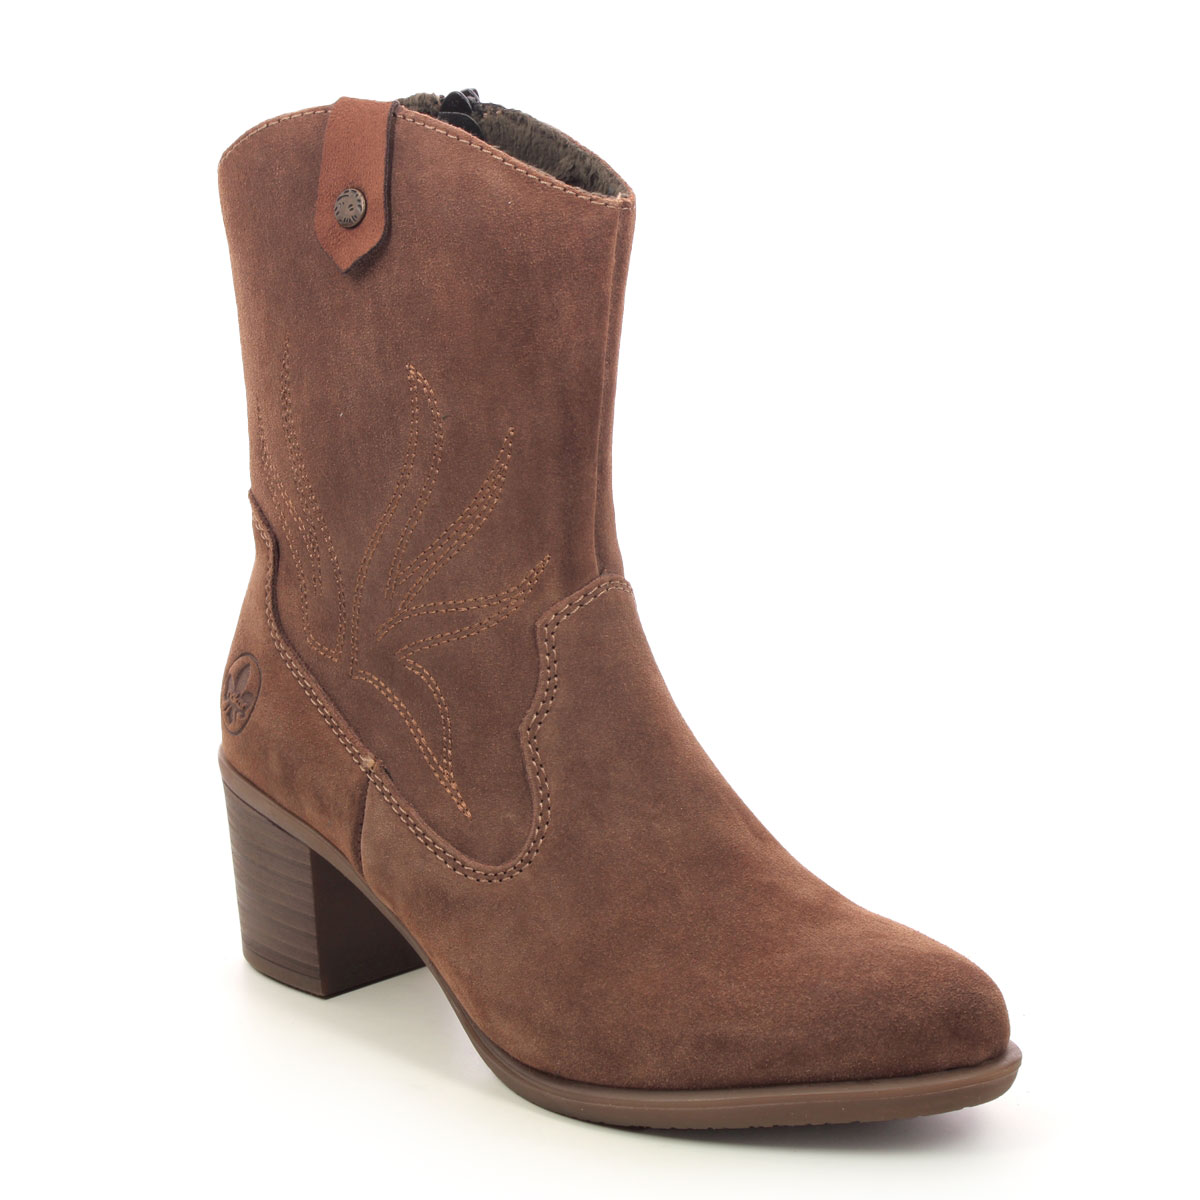 Rieker Saddle West Tan Suede Womens Ankle Boots Y2057-20 In Size 39 In Plain Tan Suede